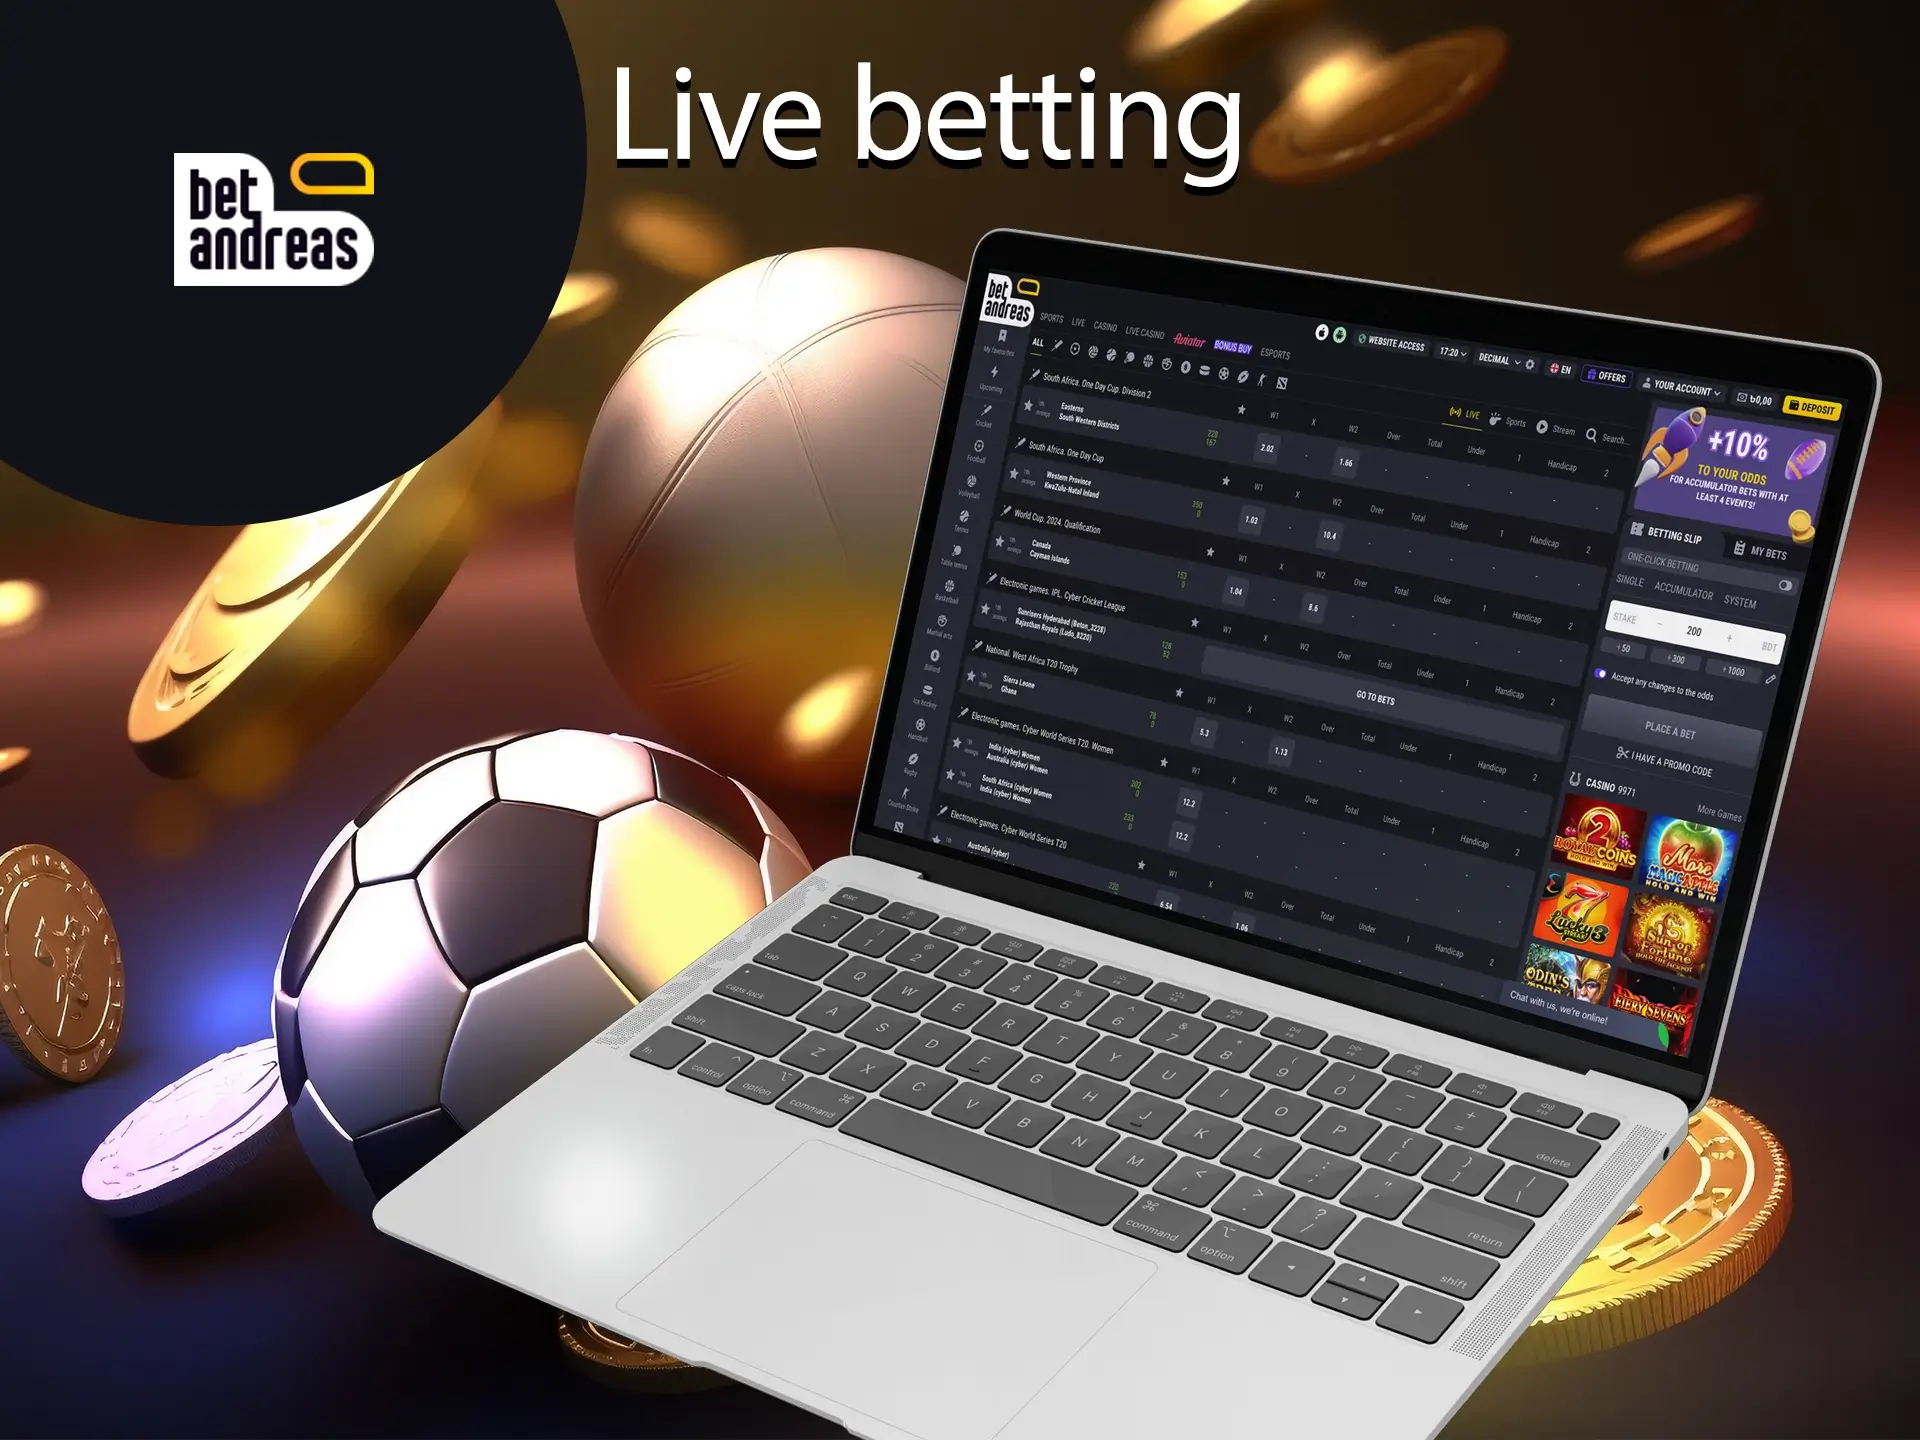 Watch the match online and place your bets, it's very convenient with BetAndreas.